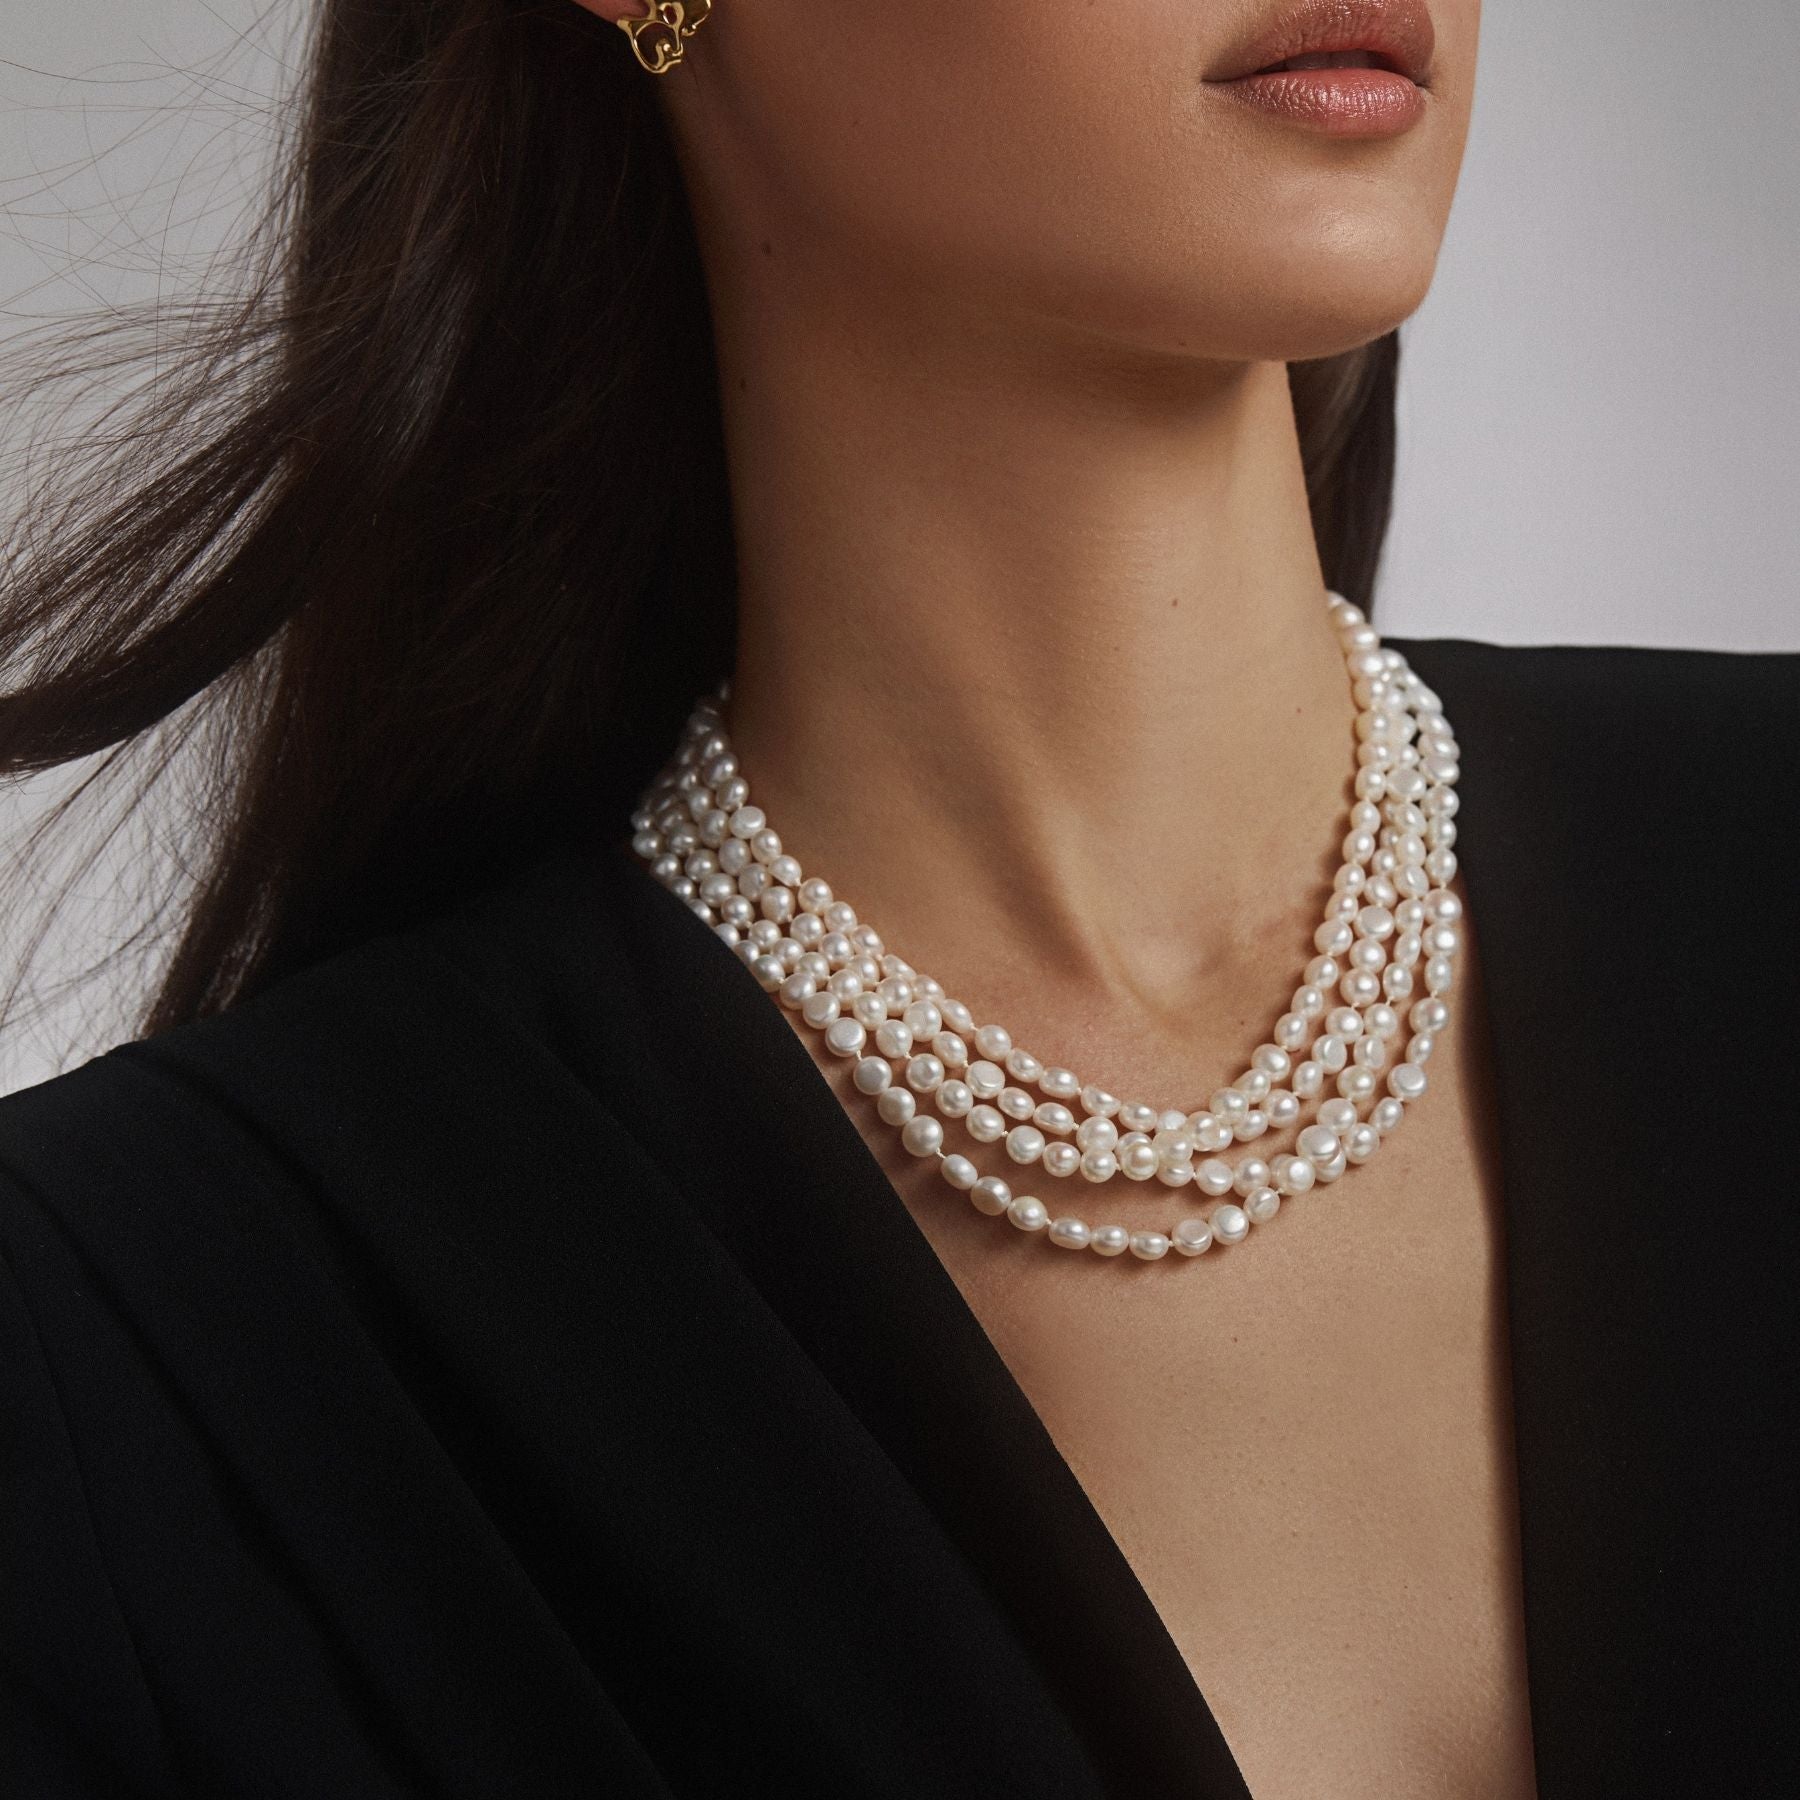 Double strand freshwater cultured button pearl necklace in an opera length finished with a 14k gold-filled toggle clasp, doubled up for a shorter, layered look.